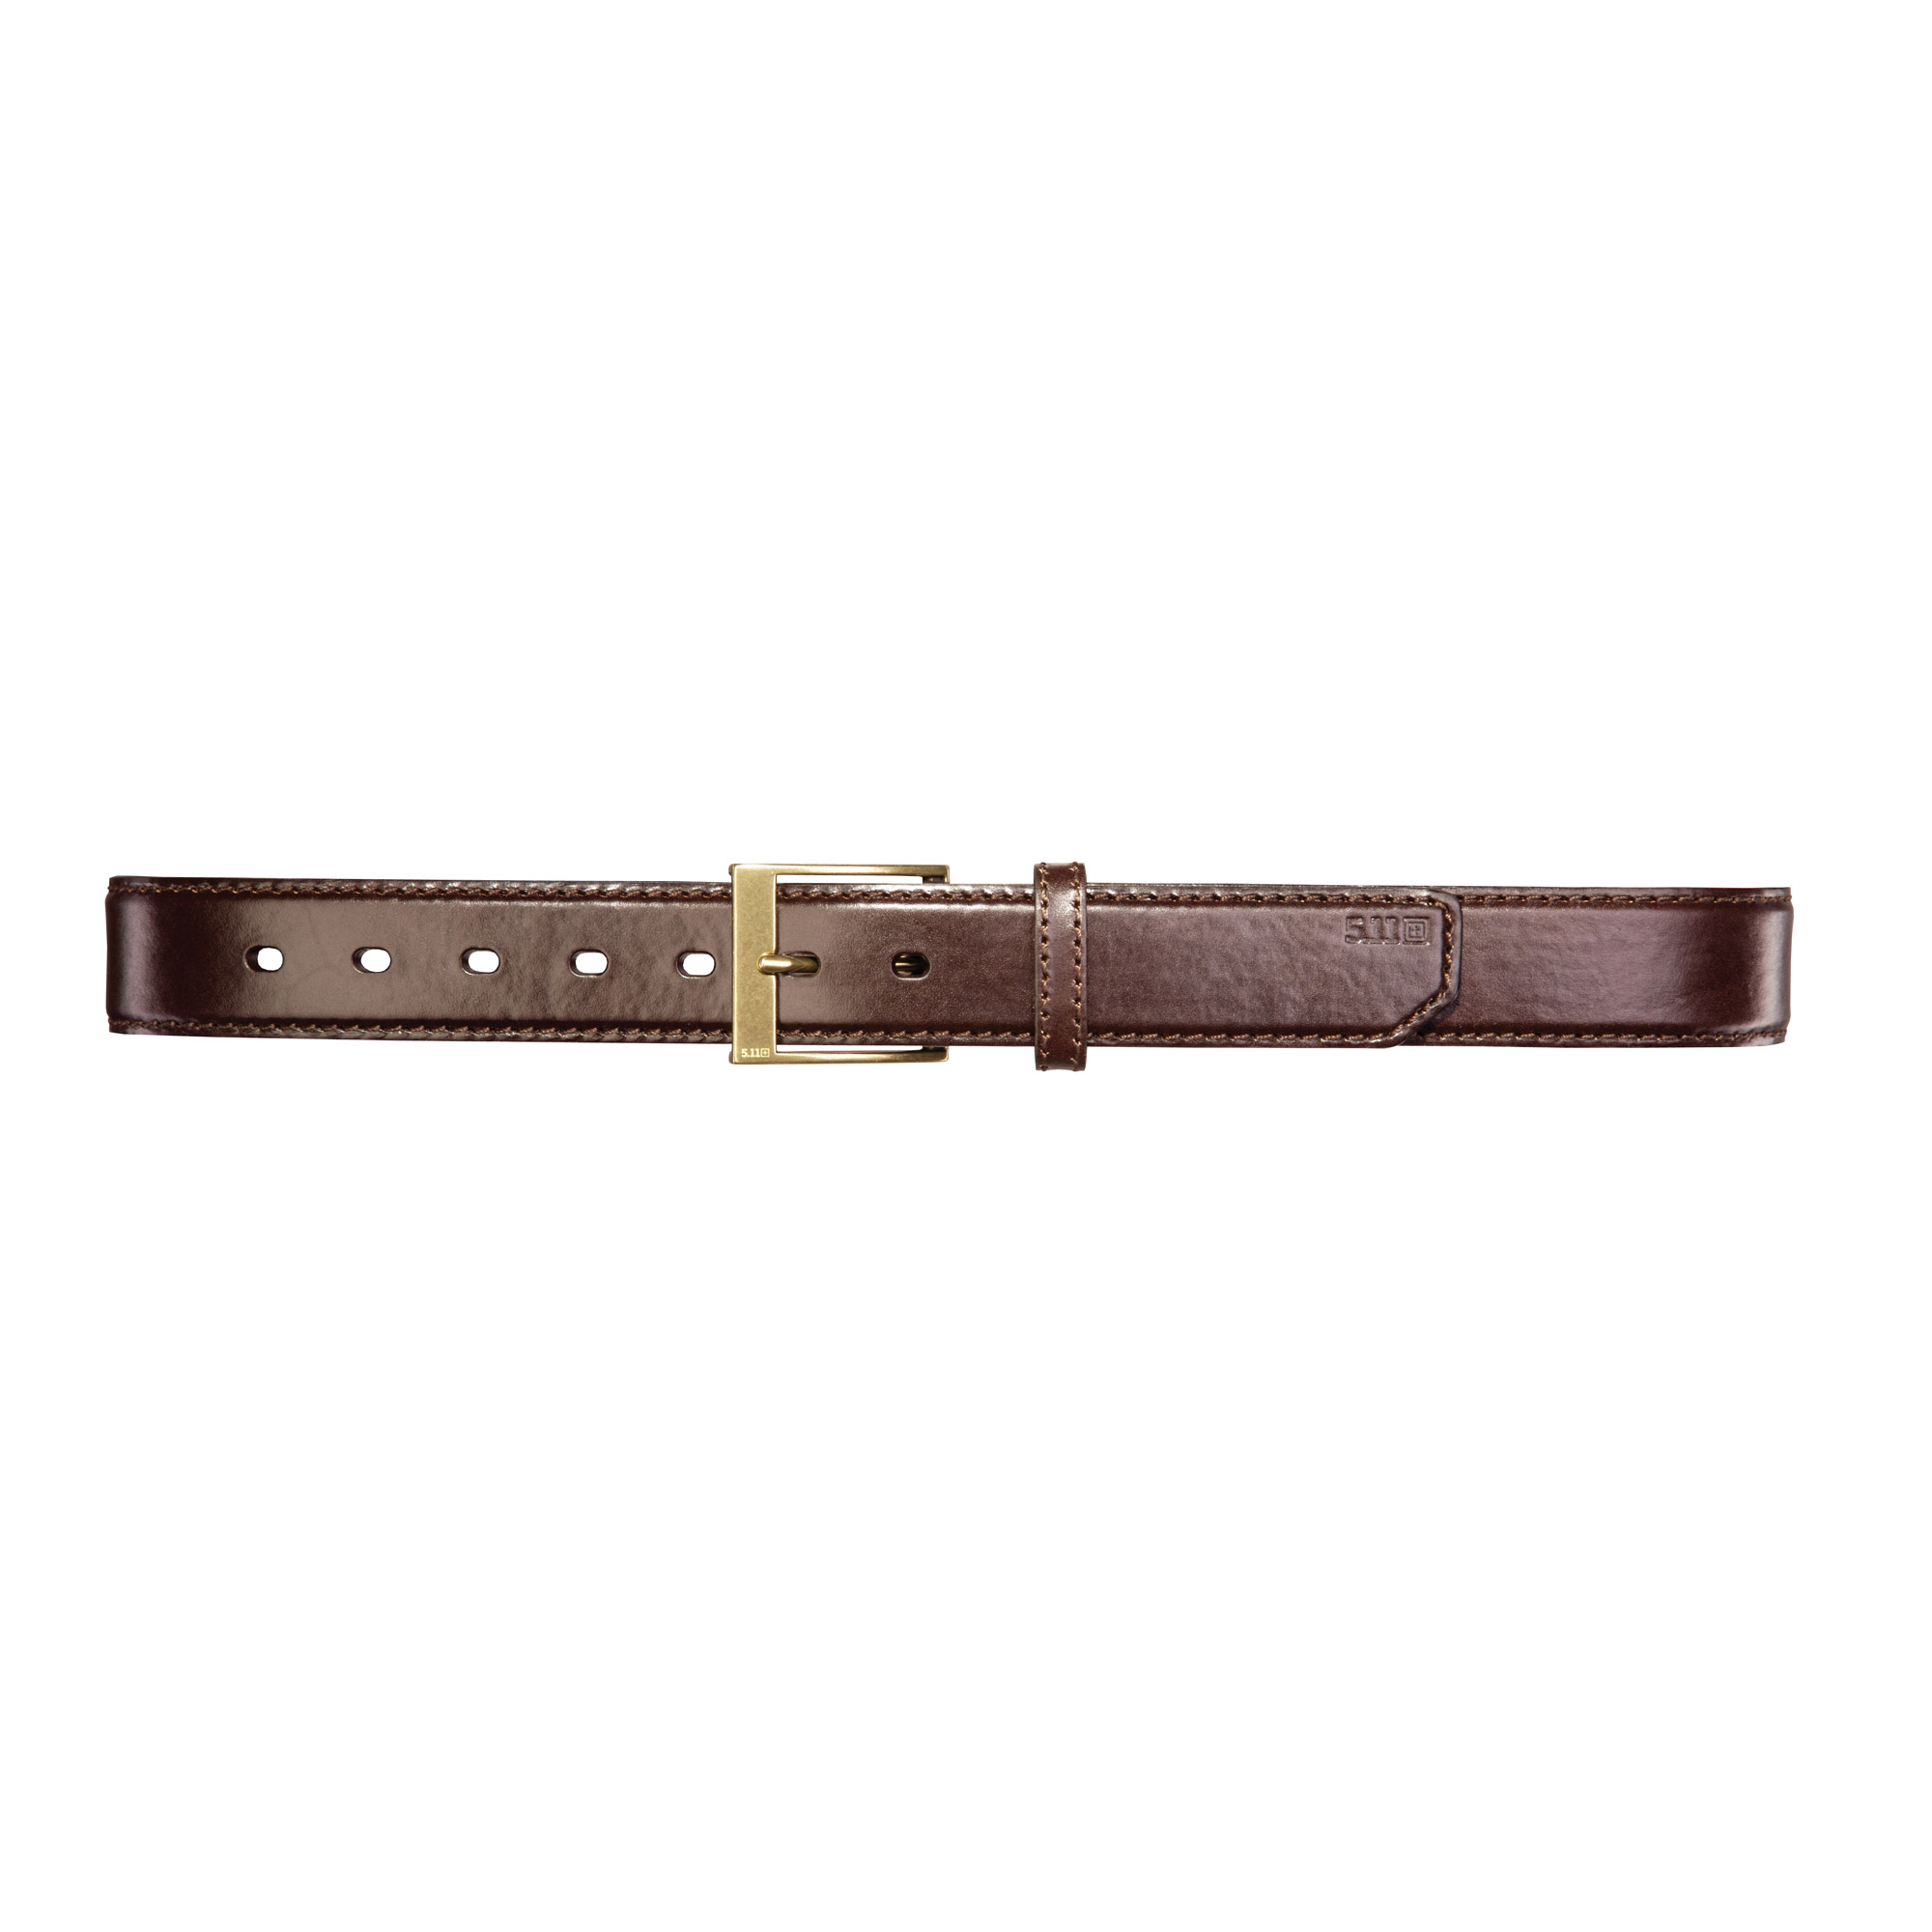 1.5″ CASUAL LEATHER BELT – Prime Safety